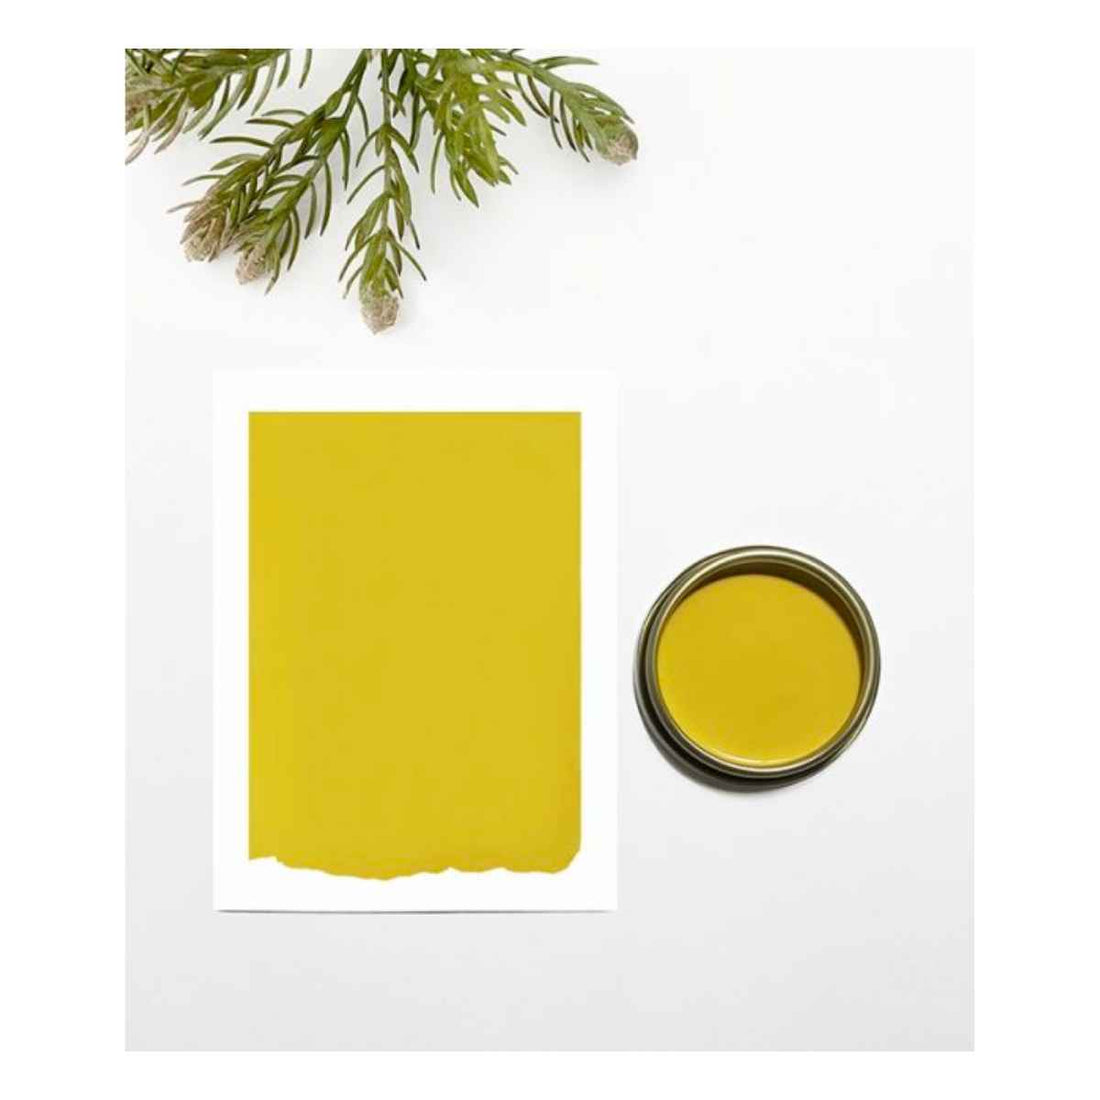 Chalk and Clay Paint For Furniture - Mustard yellow